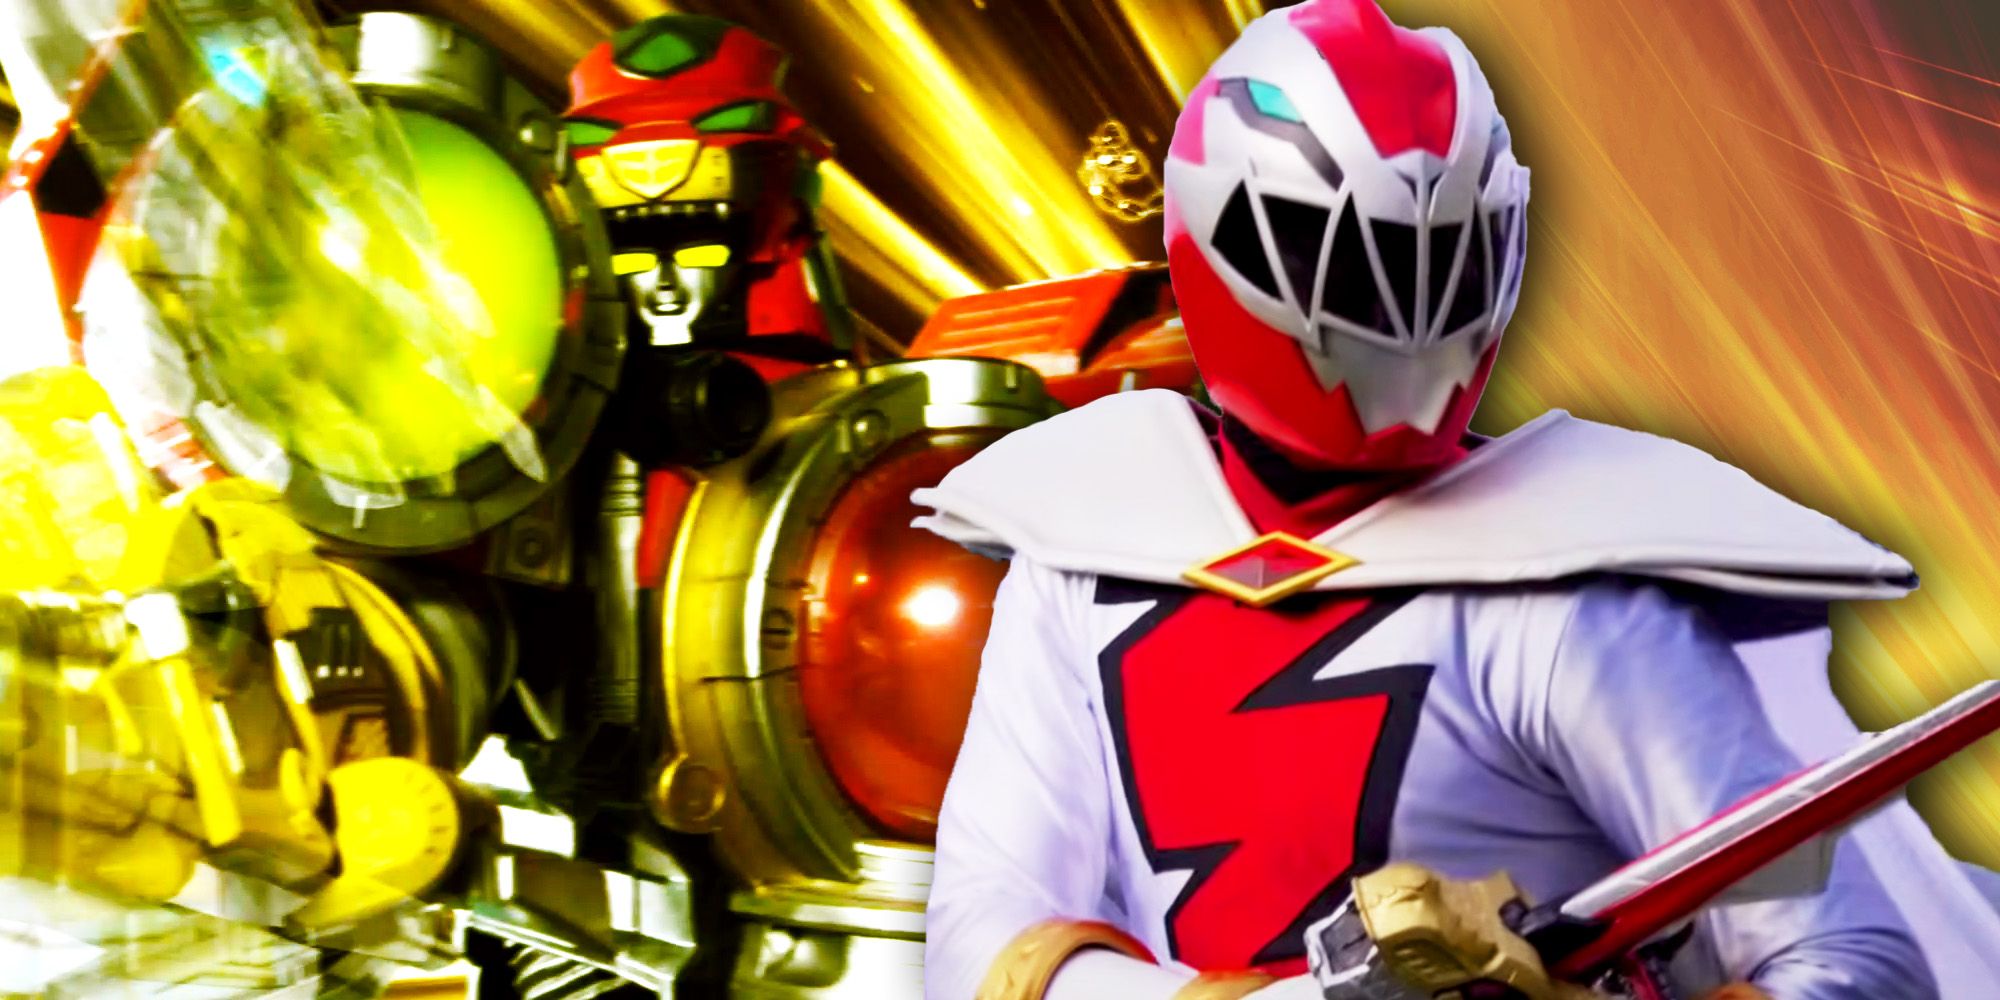 Get A Look At The New Zords In Power Rangers: Zords Rising - PopWrapped